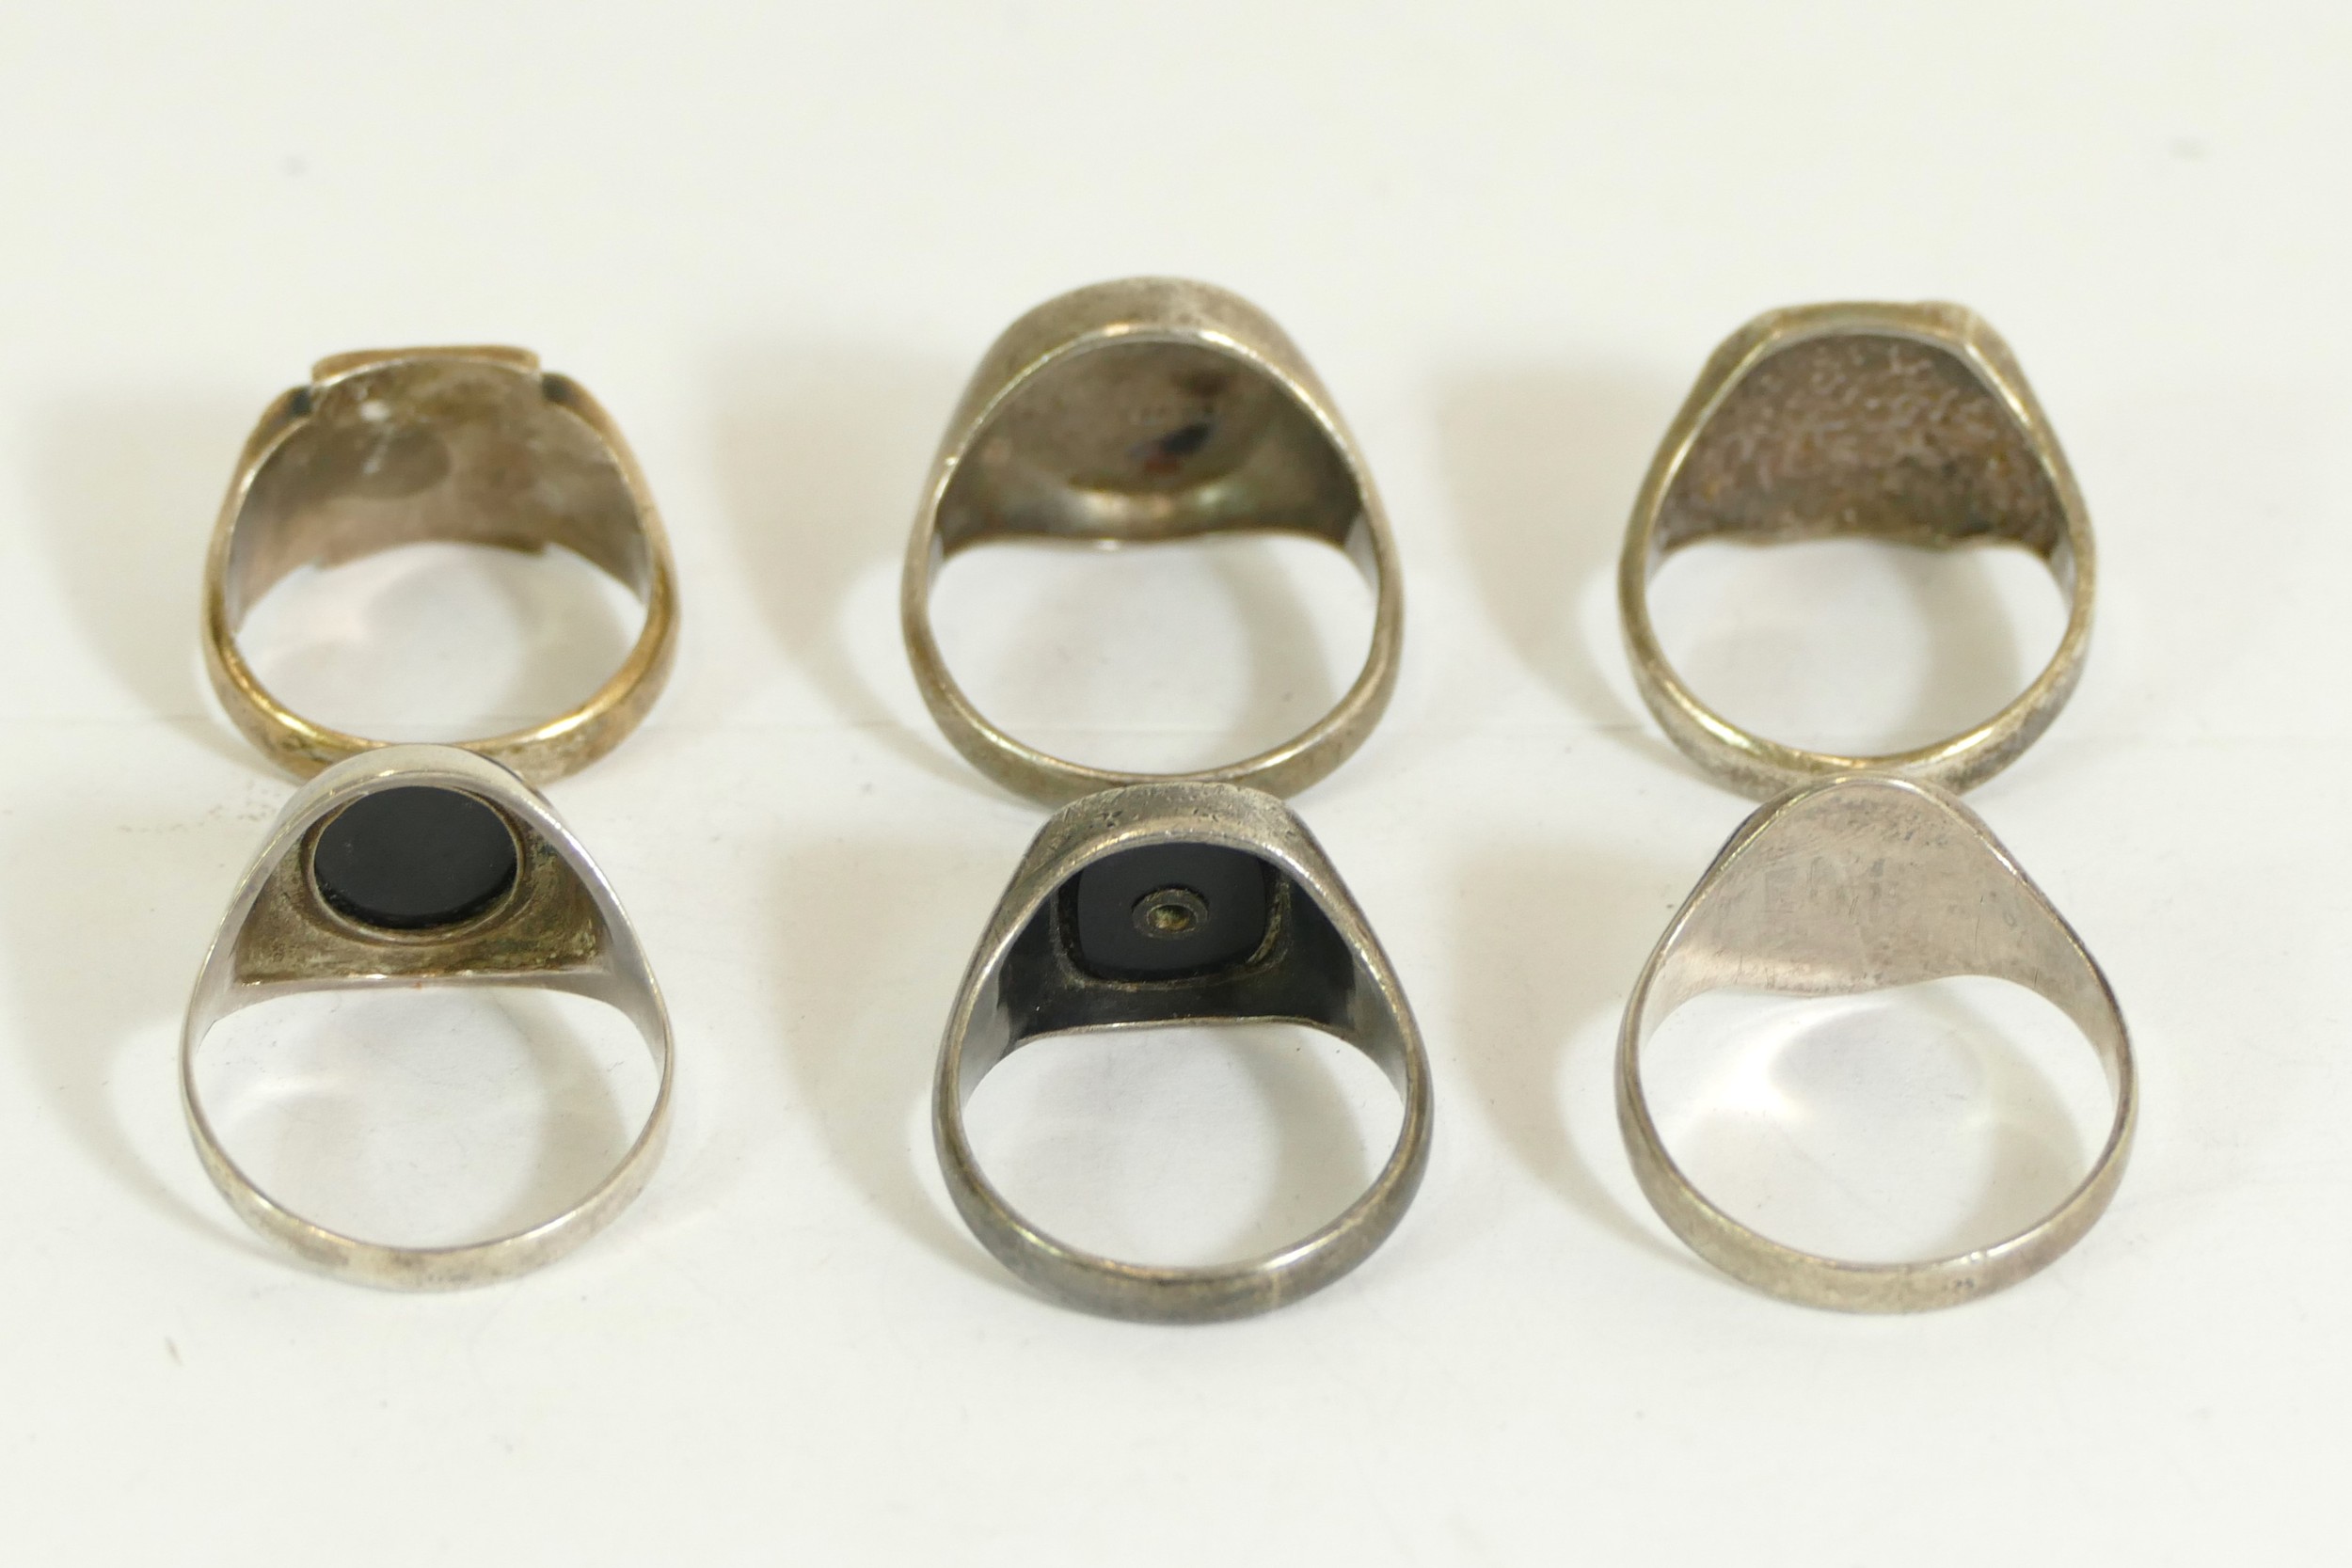 Six vintage silver signet rings, Q - T, 36gm - Image 2 of 2